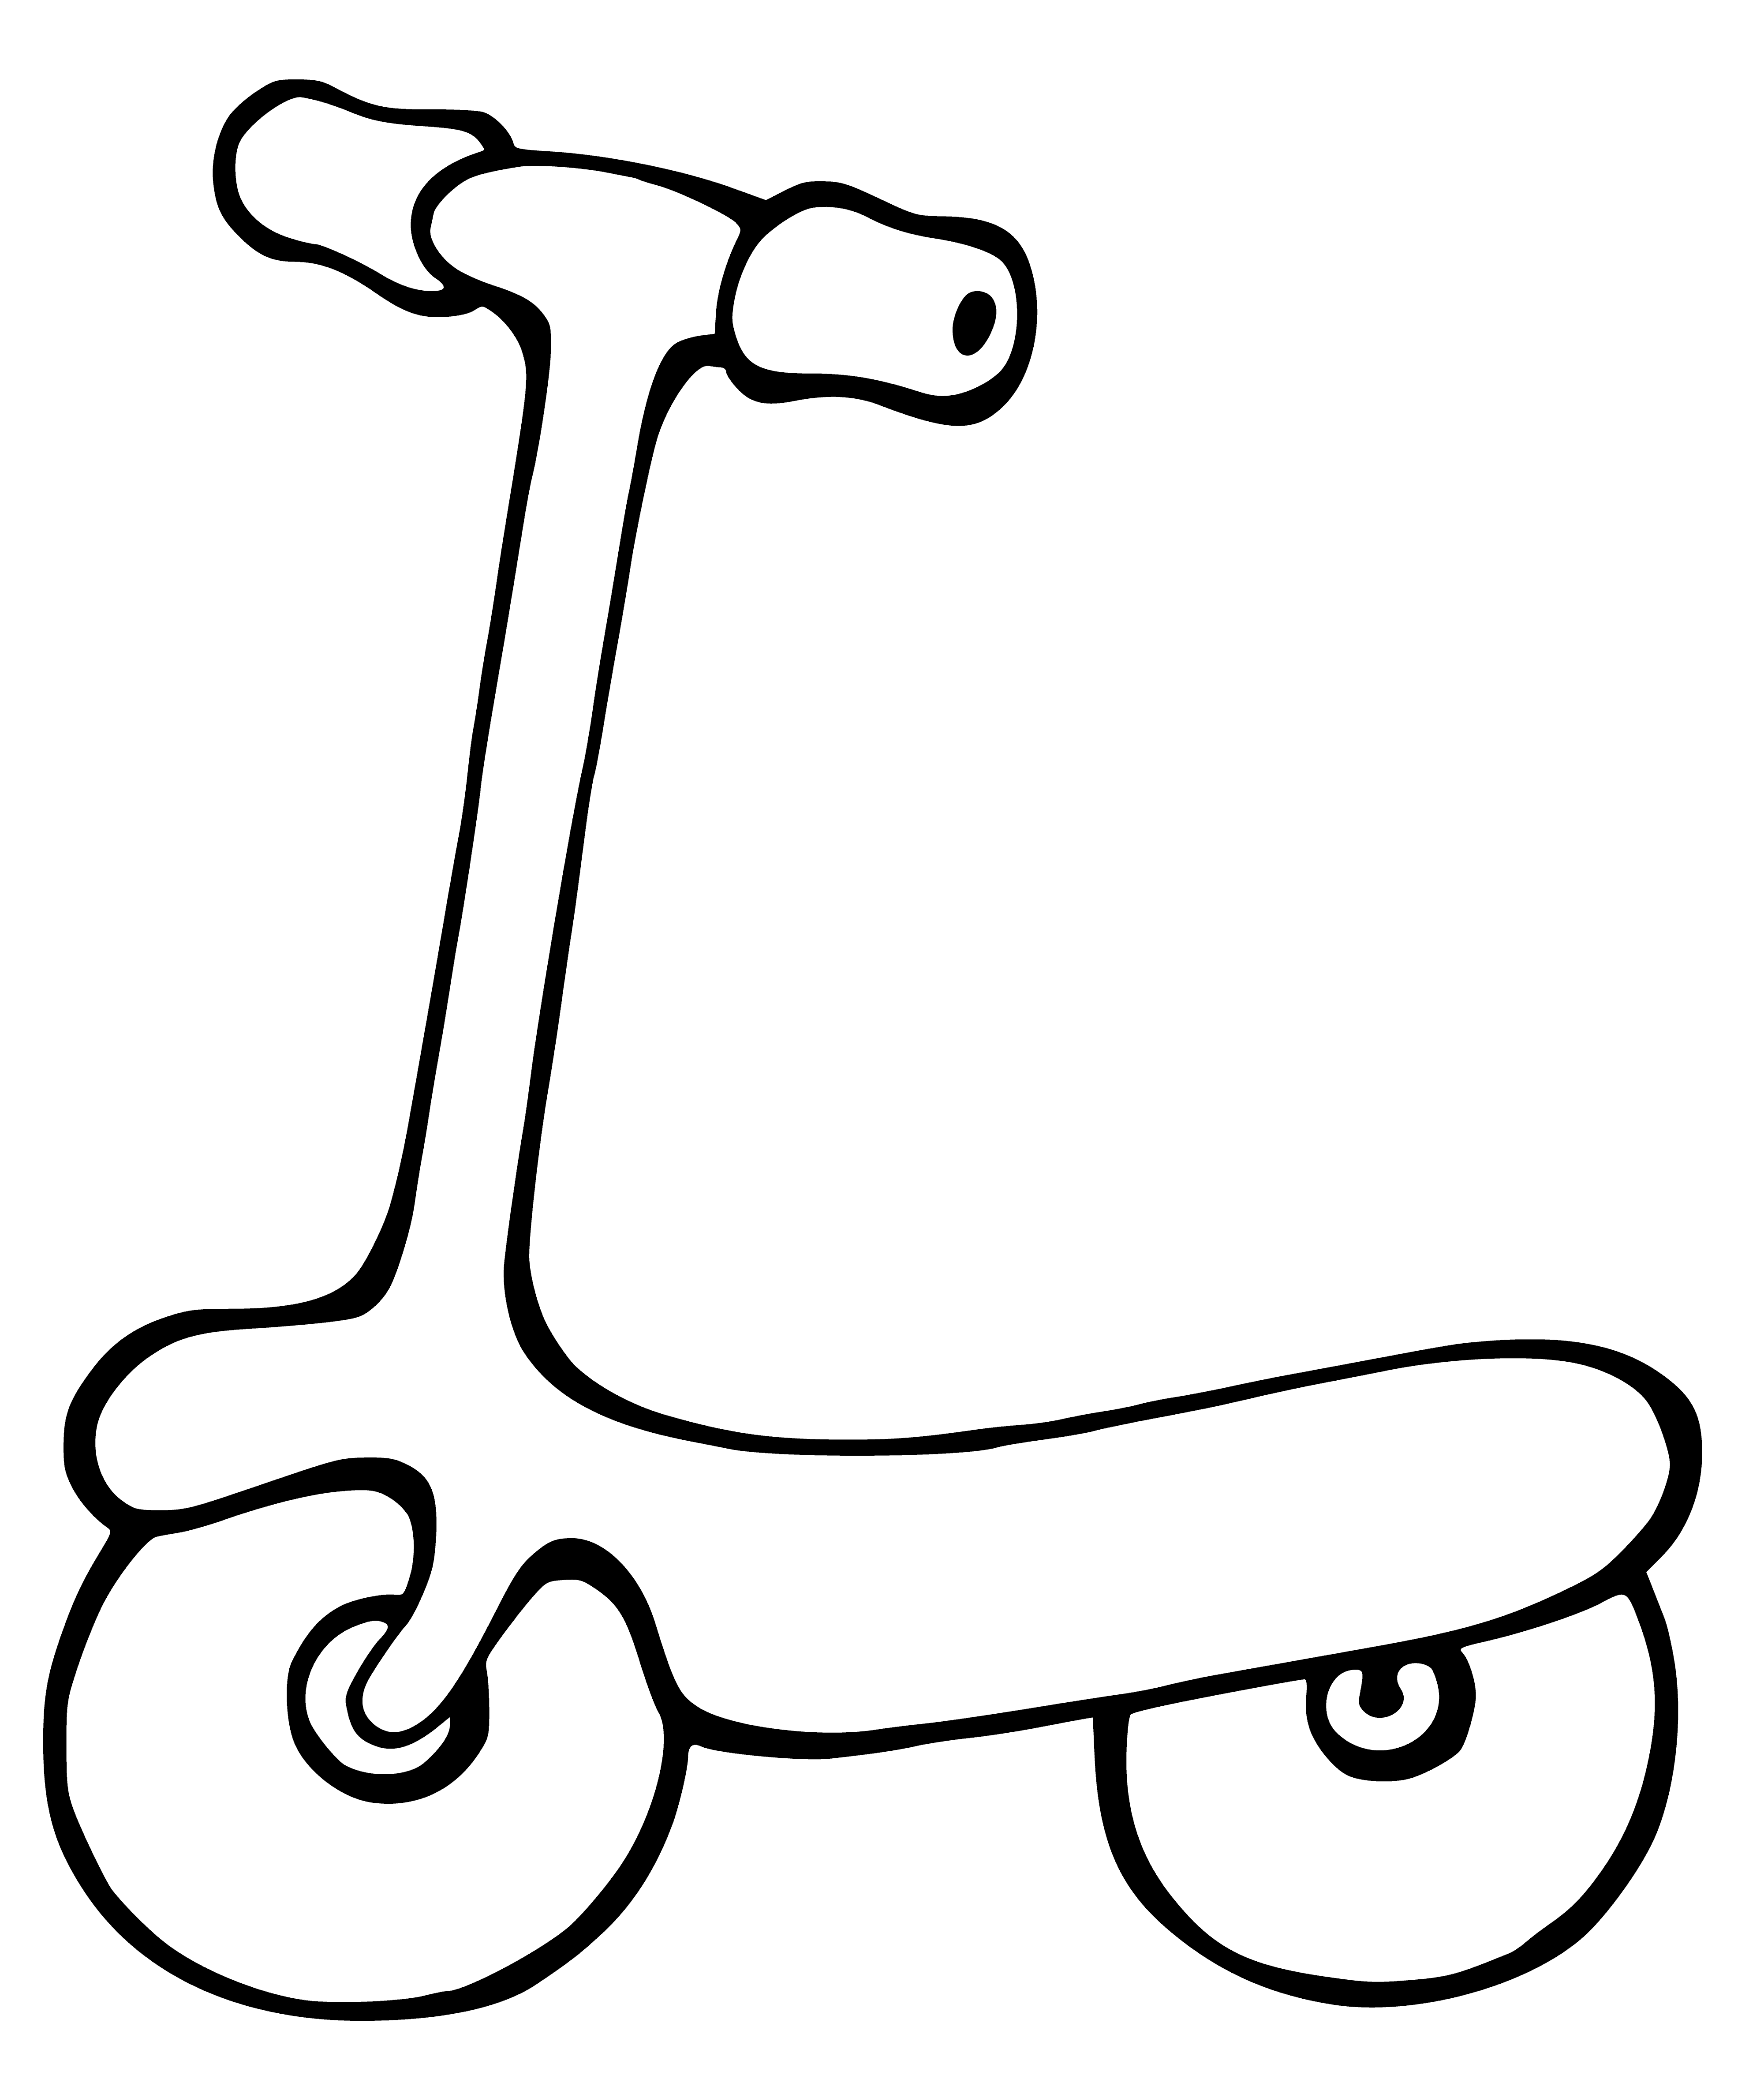 coloring page: Person riding a scooter on a path with two wheels & a standing deck between wheels, holding handlebars in front.